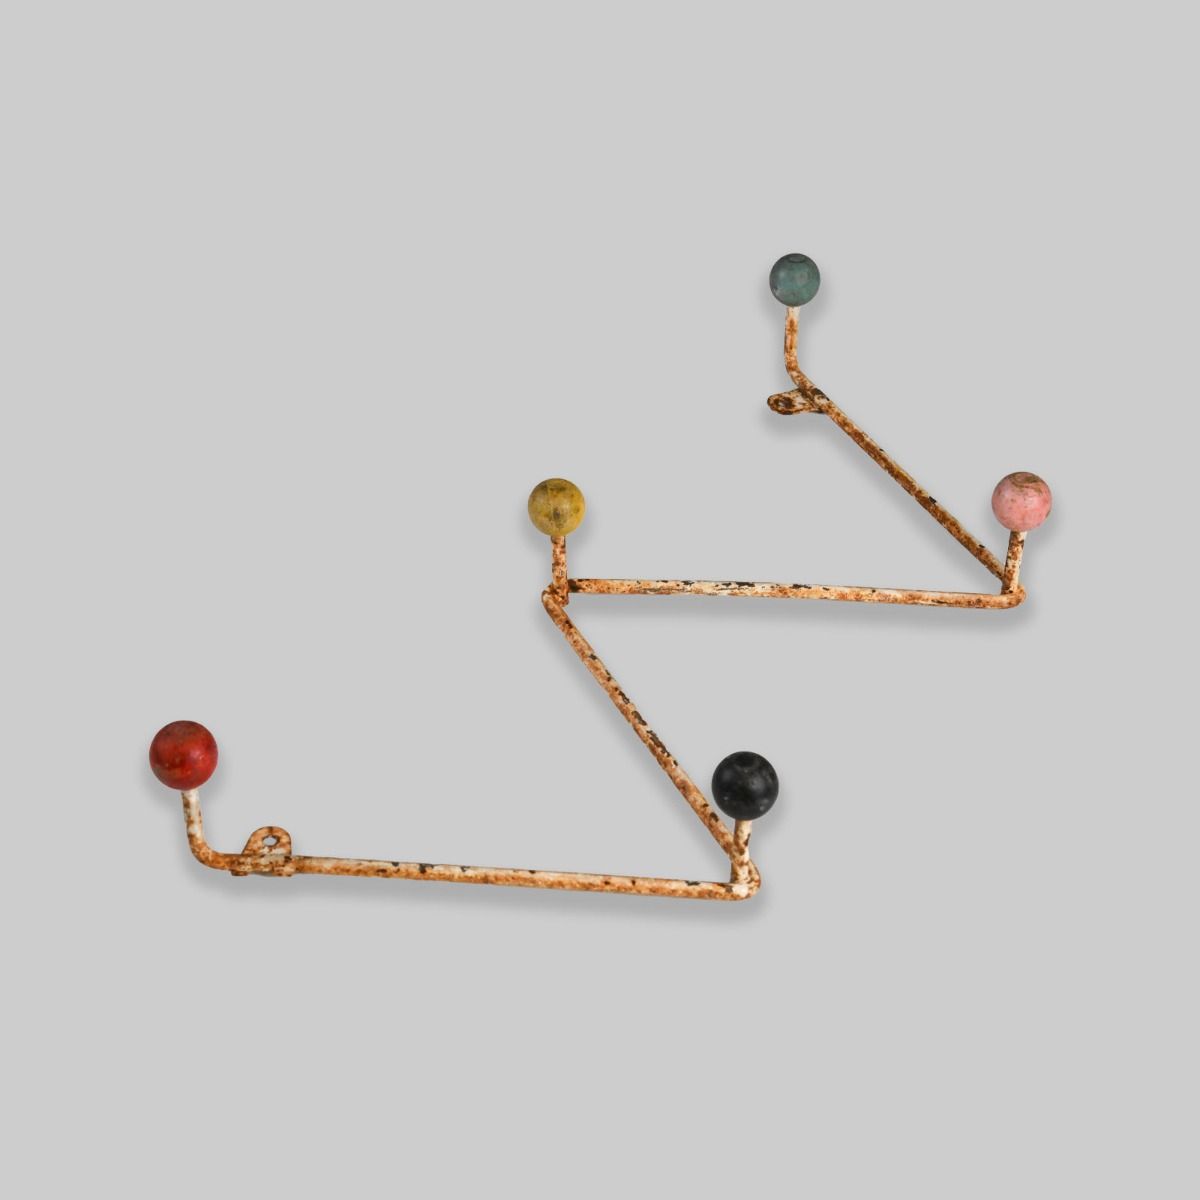 Eames Style Rusted Wall Coat Hanger